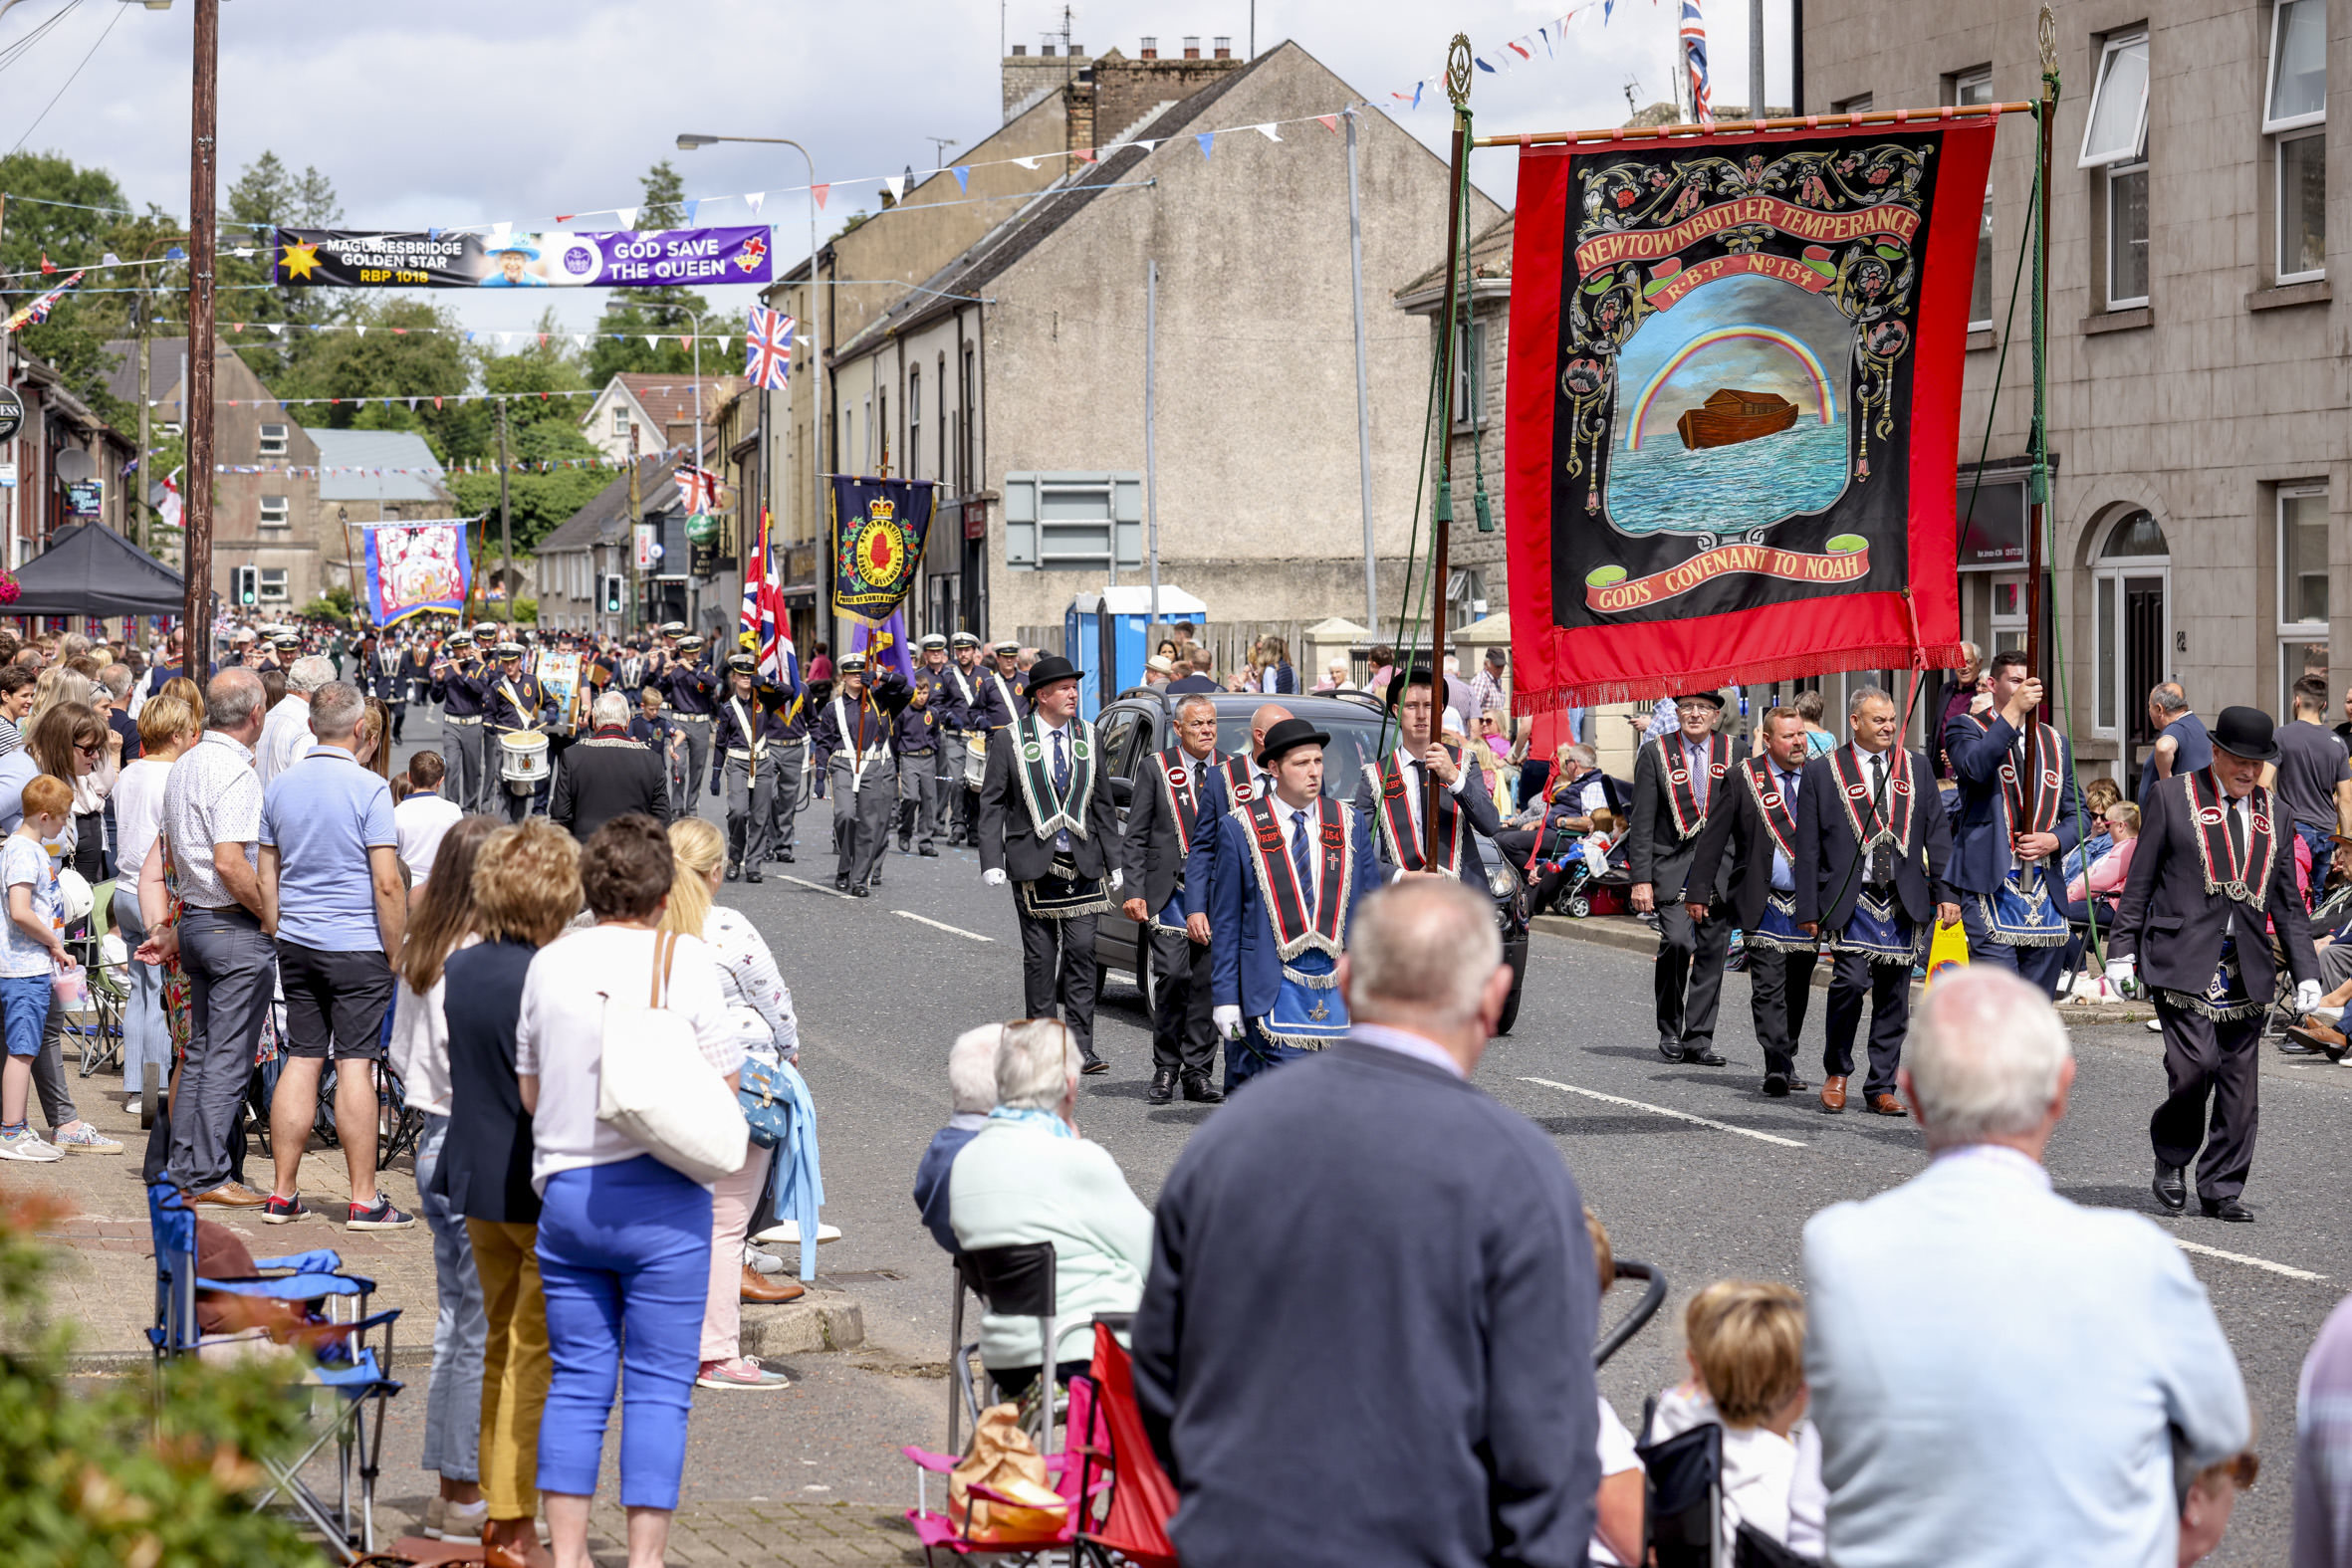 A fine view down the street of the busy scenes as bands marched along in front of many onlookers.